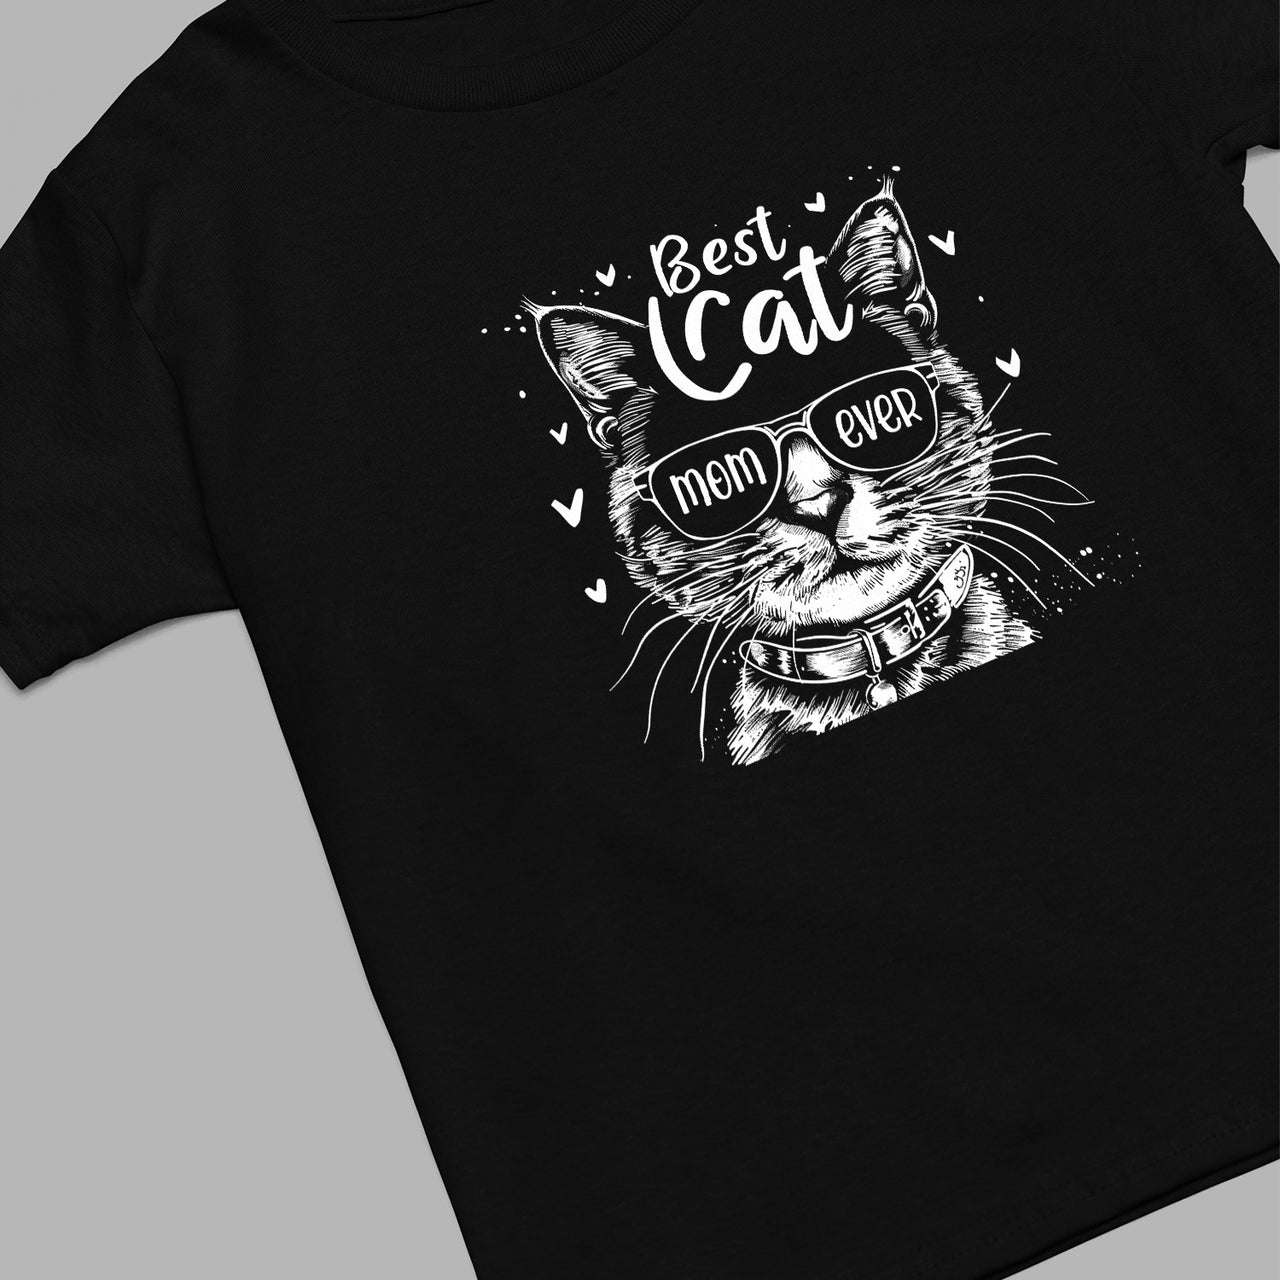 Best Cat Mom Ever Shirt, Best Cat Mom Shirt, Pet Lover Shirt, Cat Lover Shirt, Best Cat Mom Ever, Cat Owner Shirt, Gift For Cat Mom, Funny Cat Shirts, Women Cat T-Shirt, Mother's Day Gift, Cat Lover Wife Gifts, Cat Shirt 01